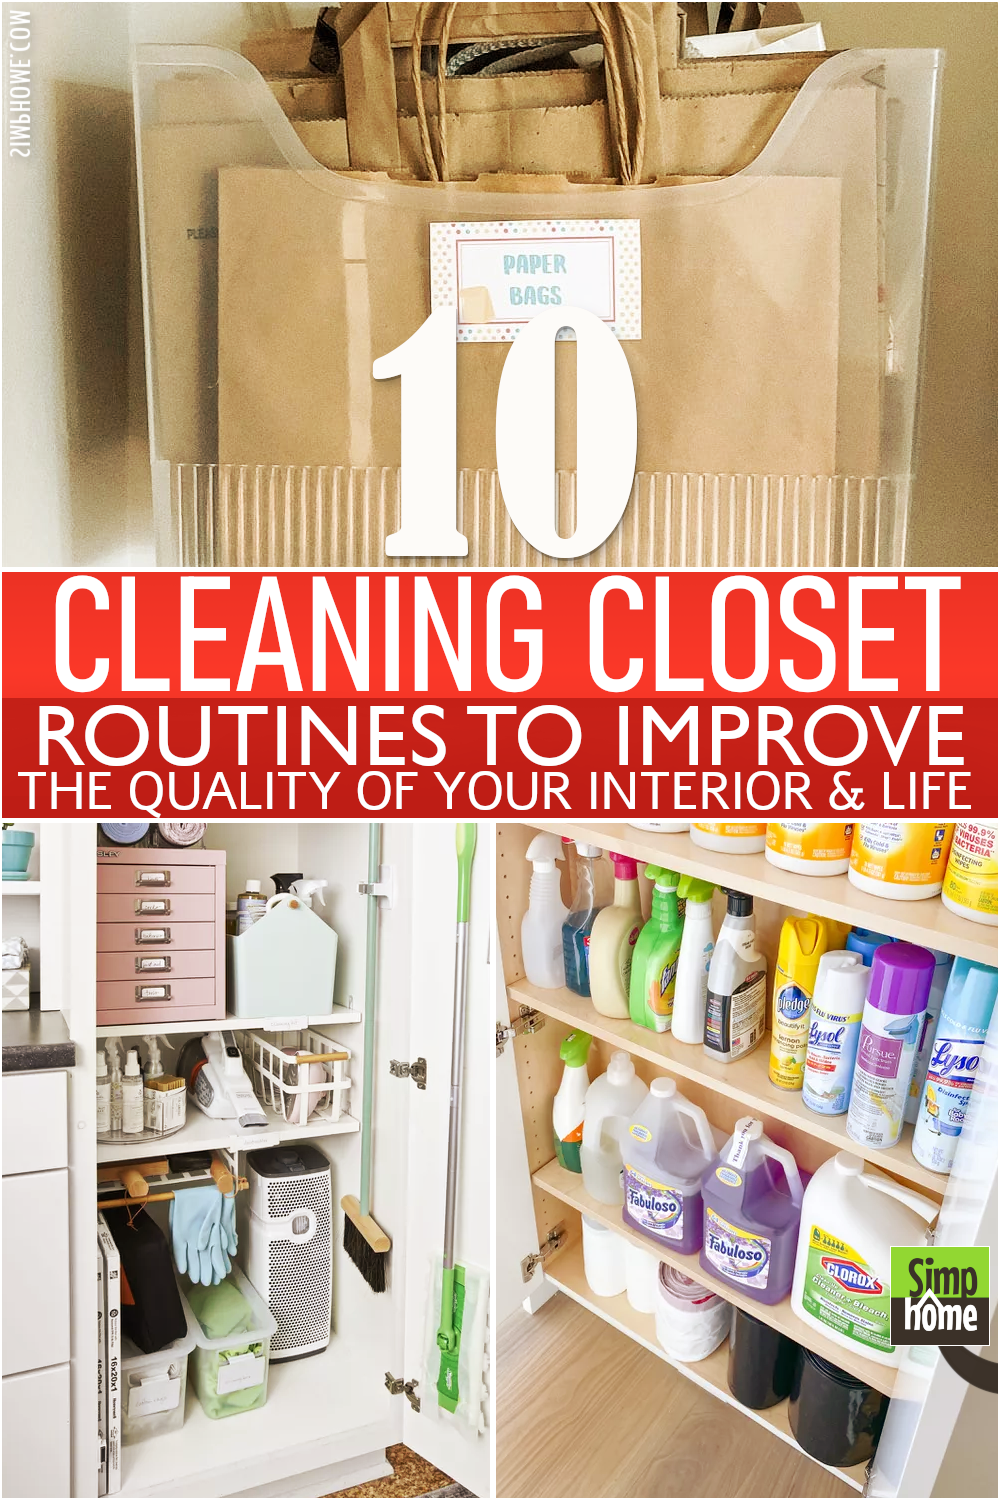 This is the poster for the 10 Cleaning Closet list and video